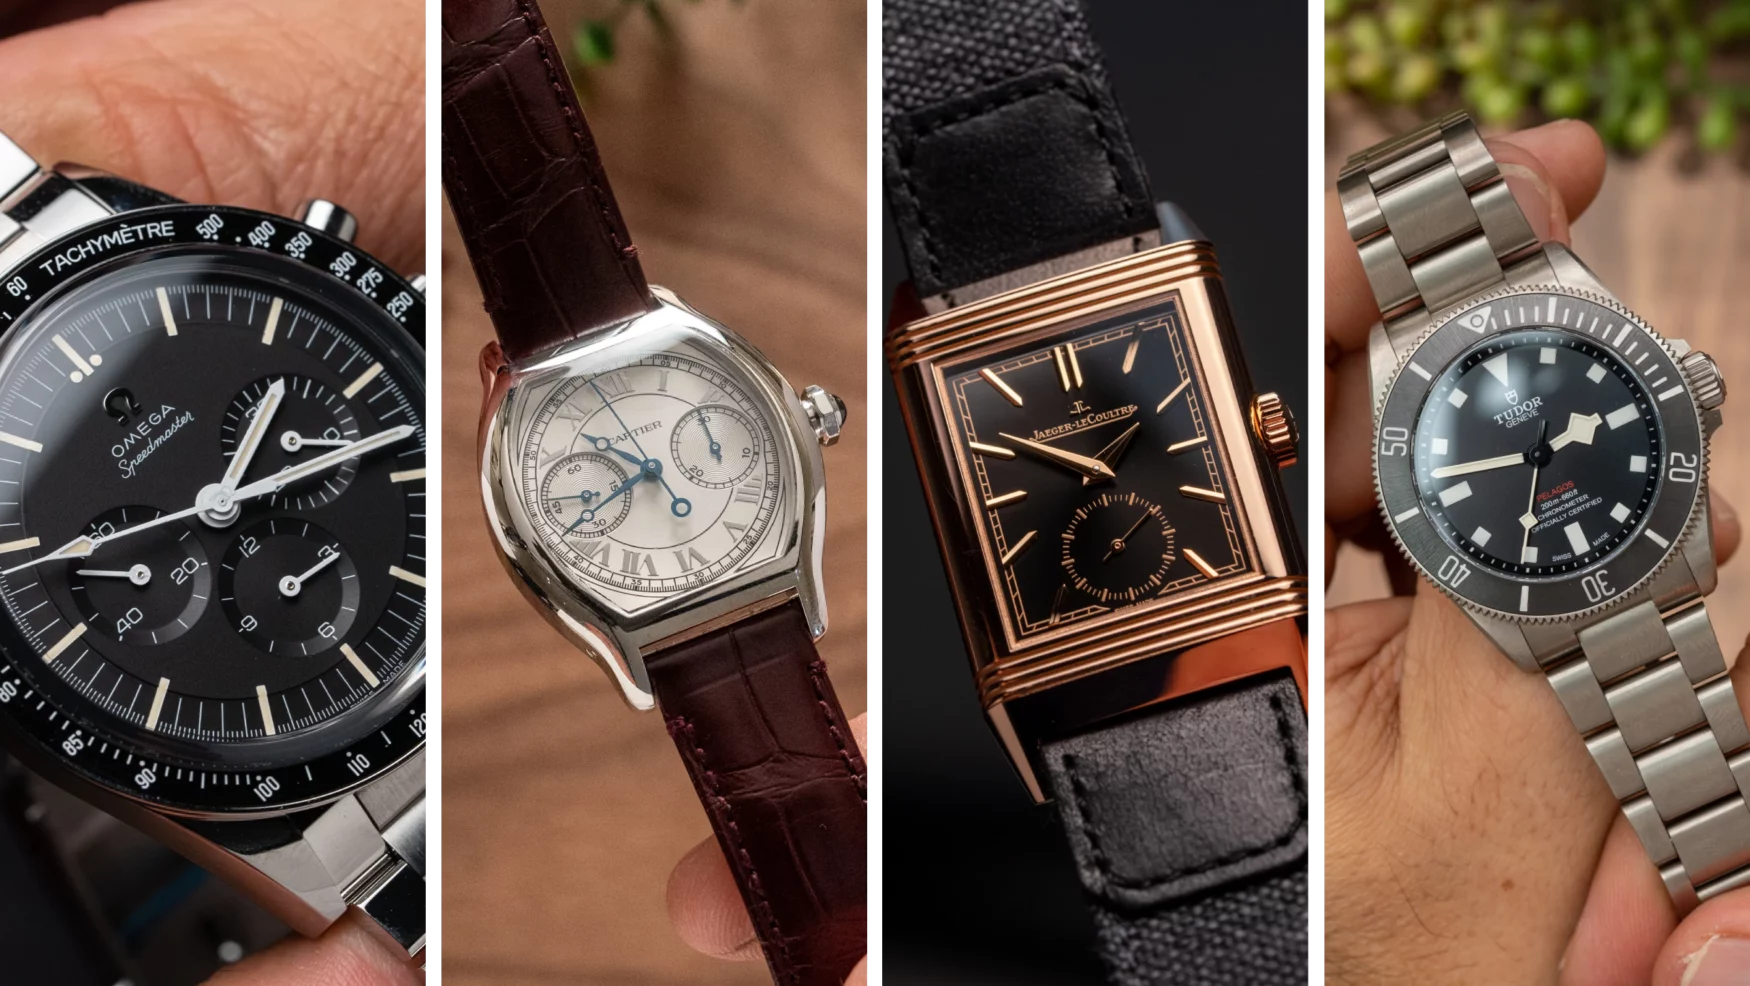 The Time+Tide team picks the one watch brand they would wear for life